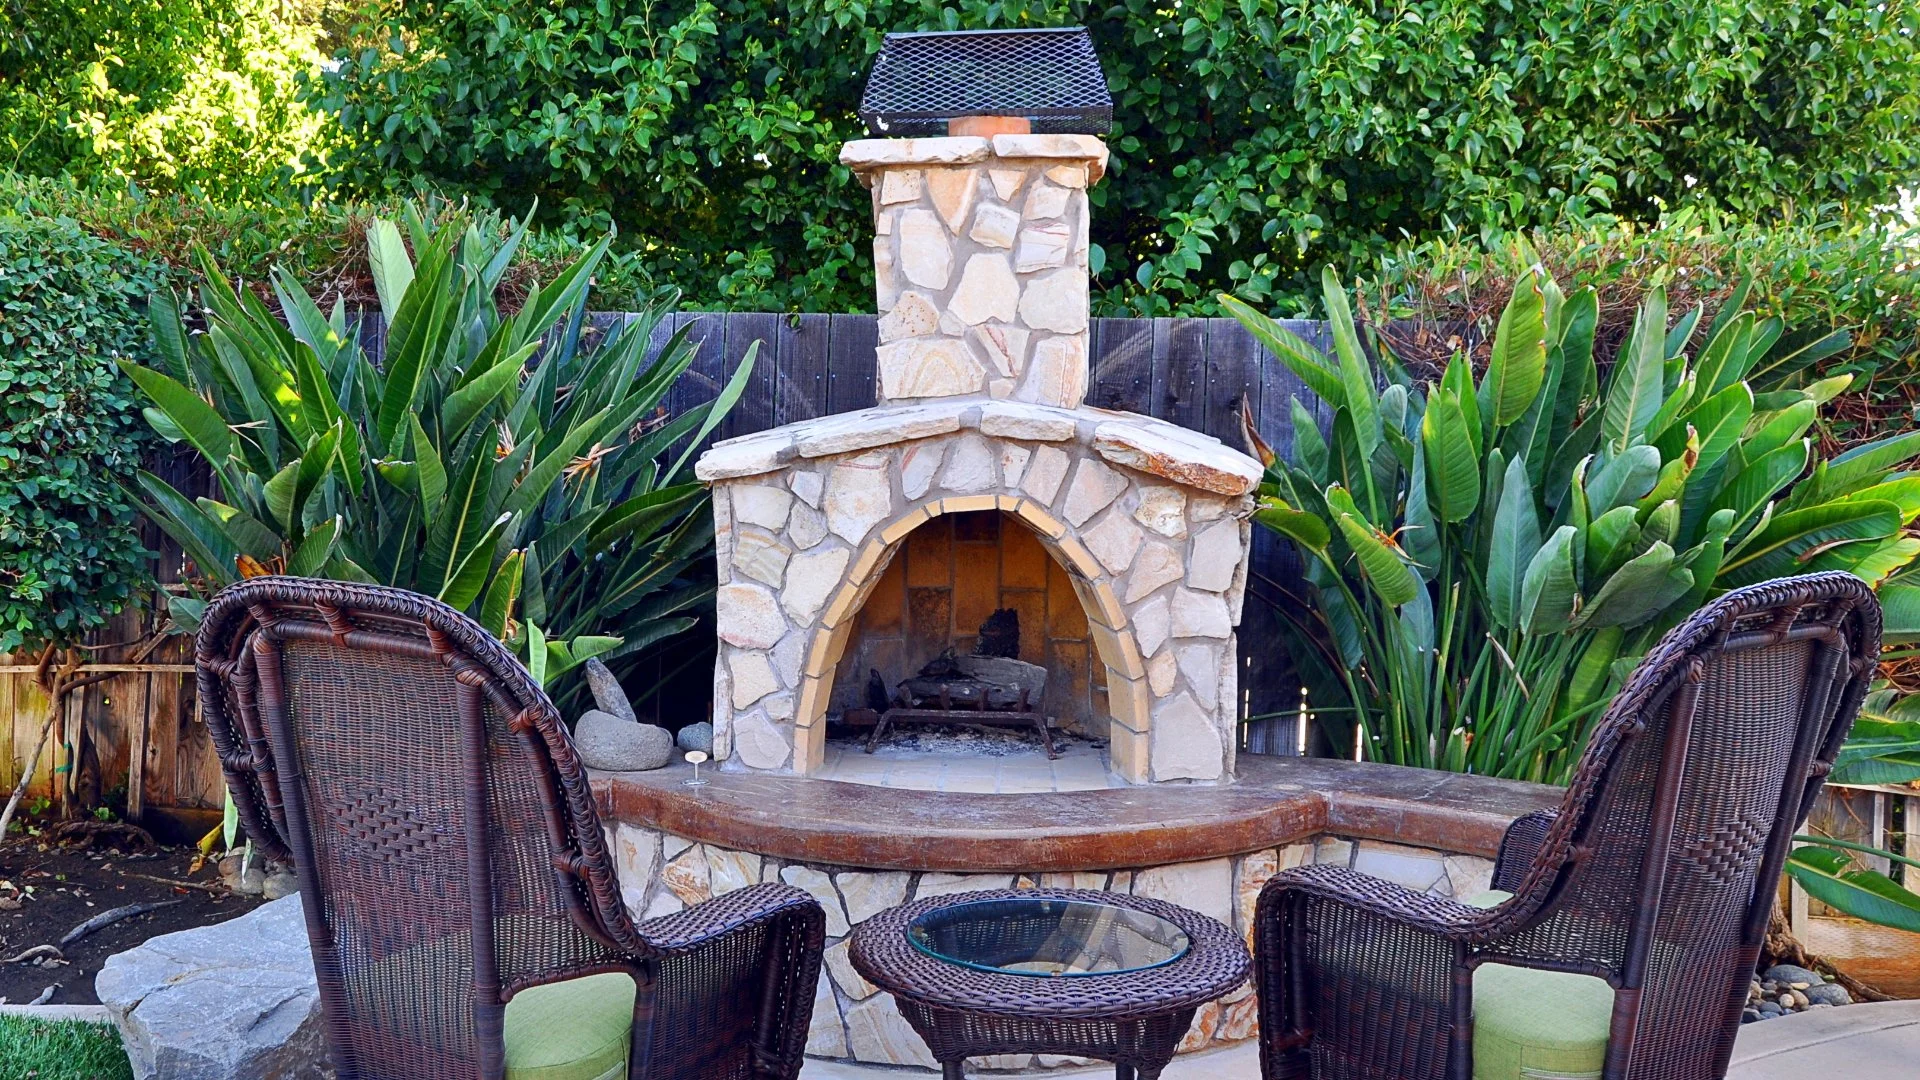 Should You Go With a Custom Outdoor Fireplace or Use a Pre-Designed Kit?